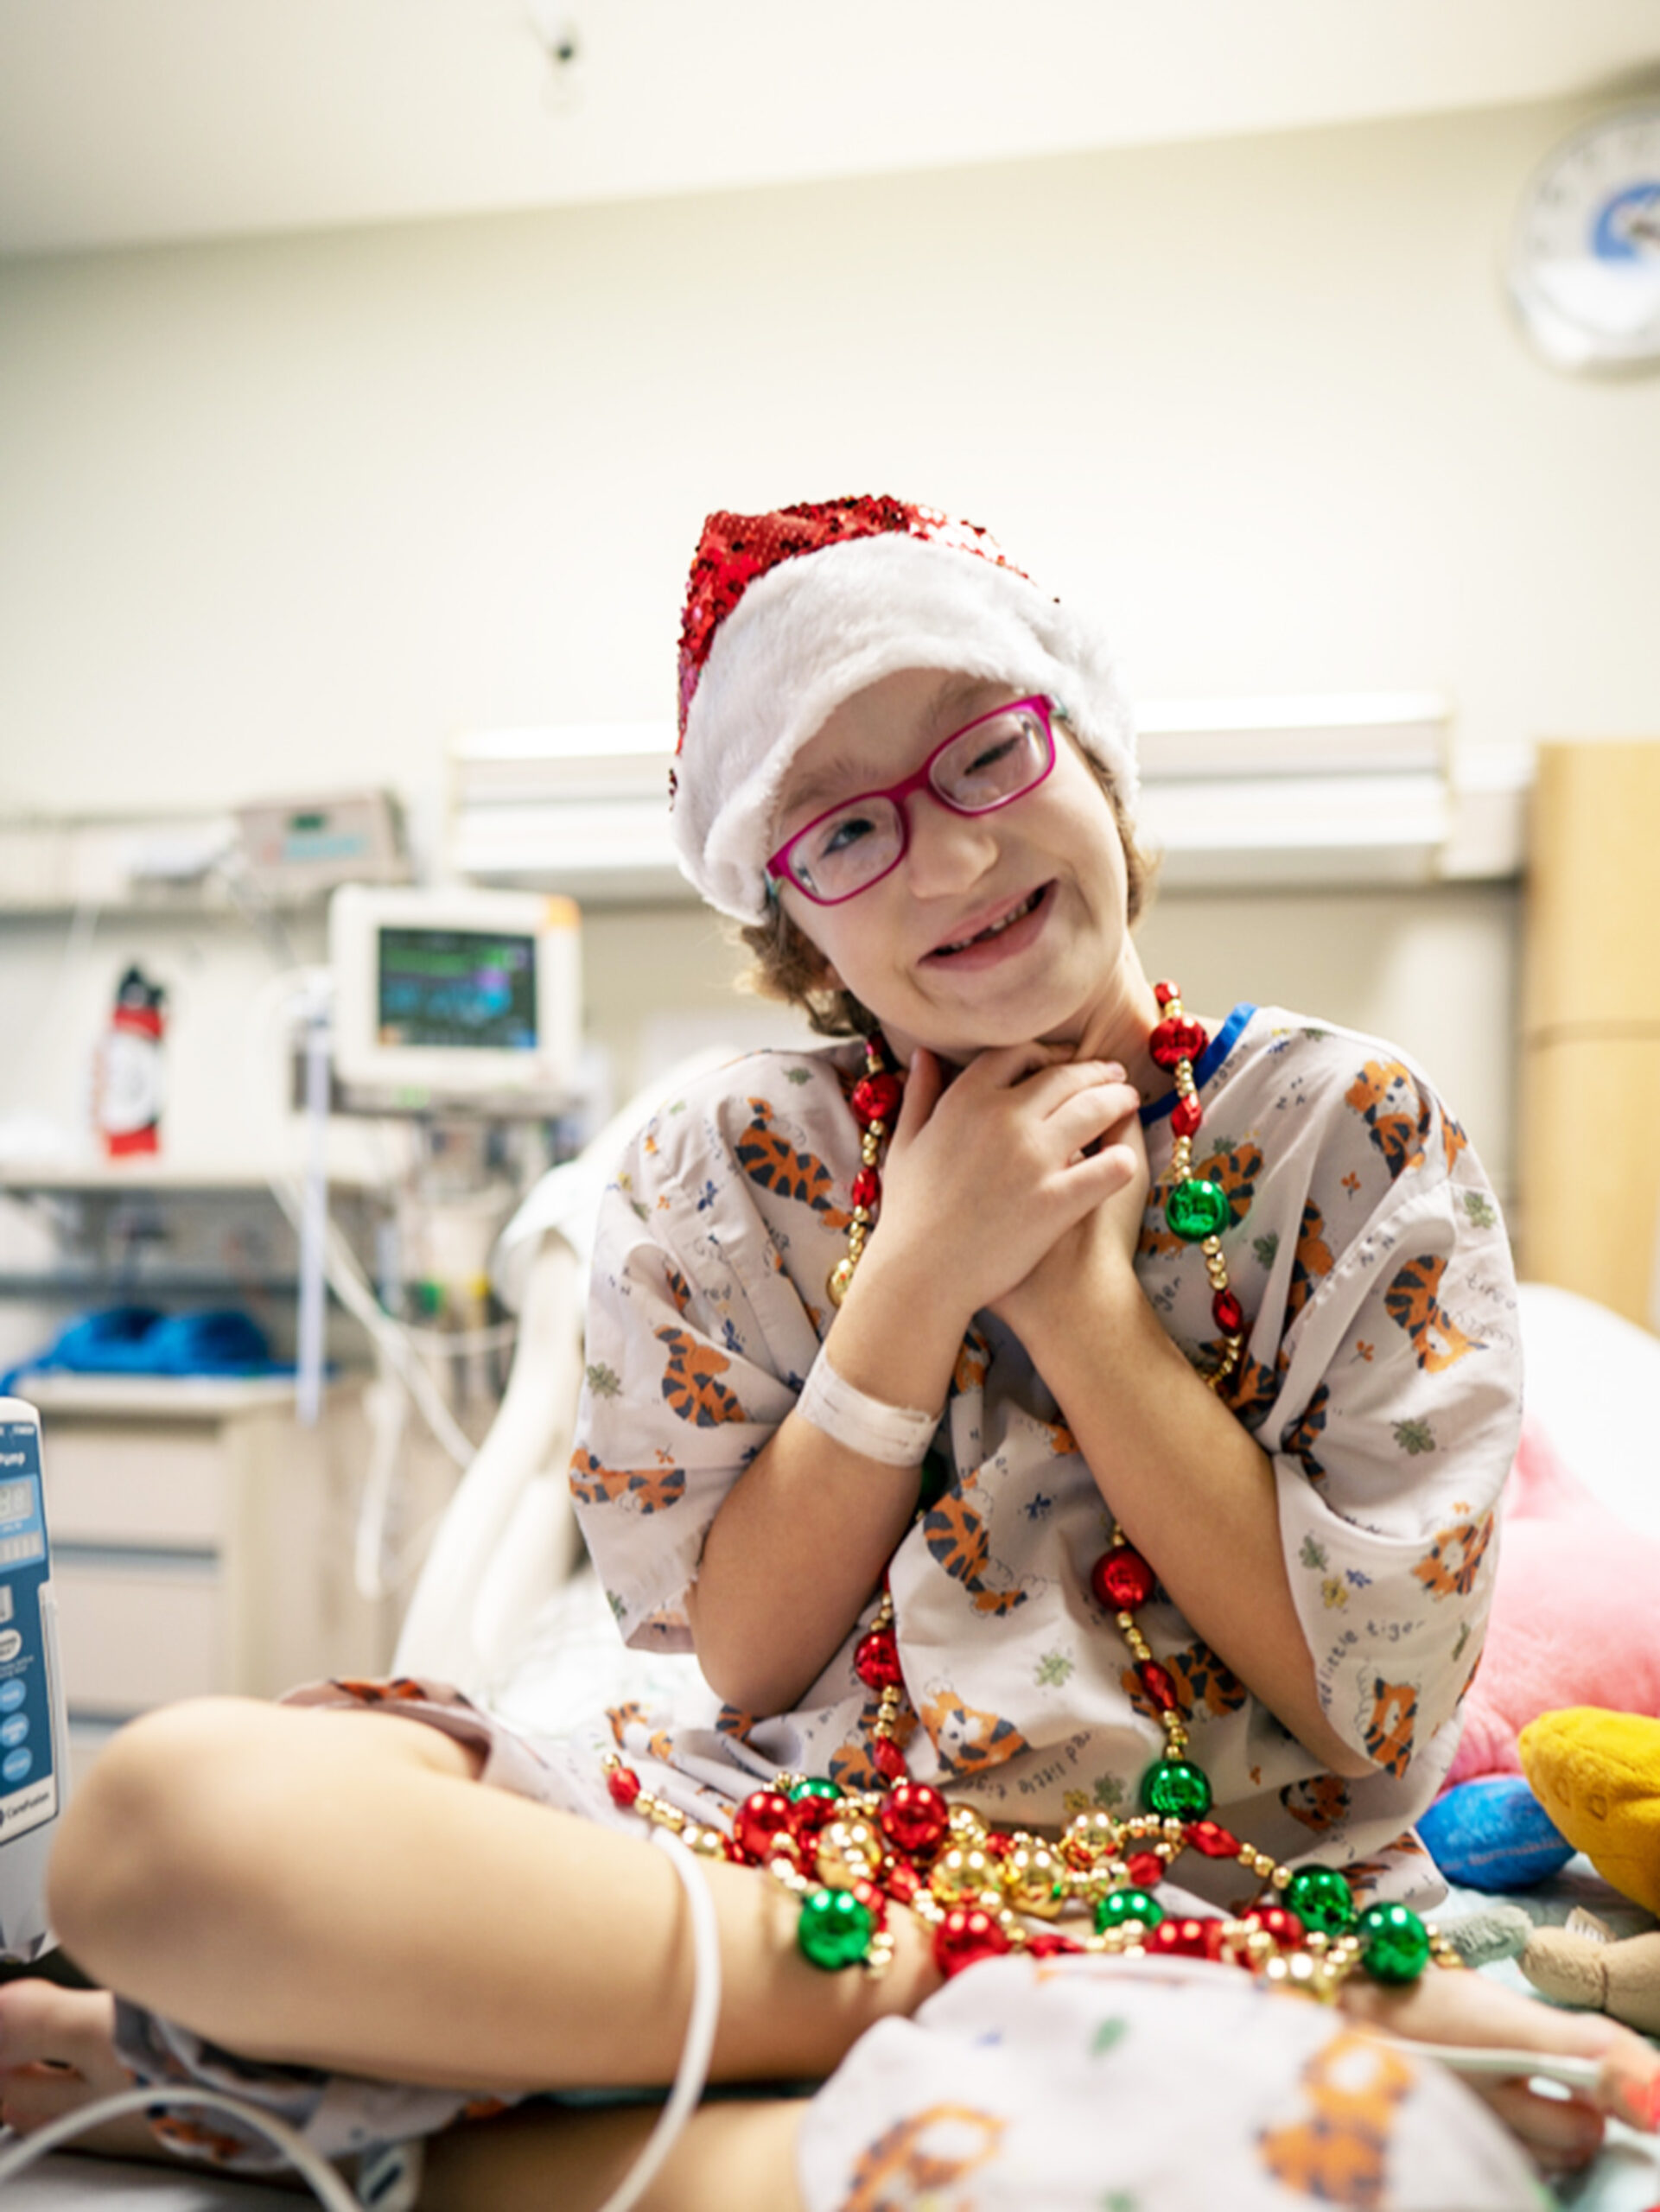 Lily celebrating the holidays in her hospital room at CHOC Hospital in Orange